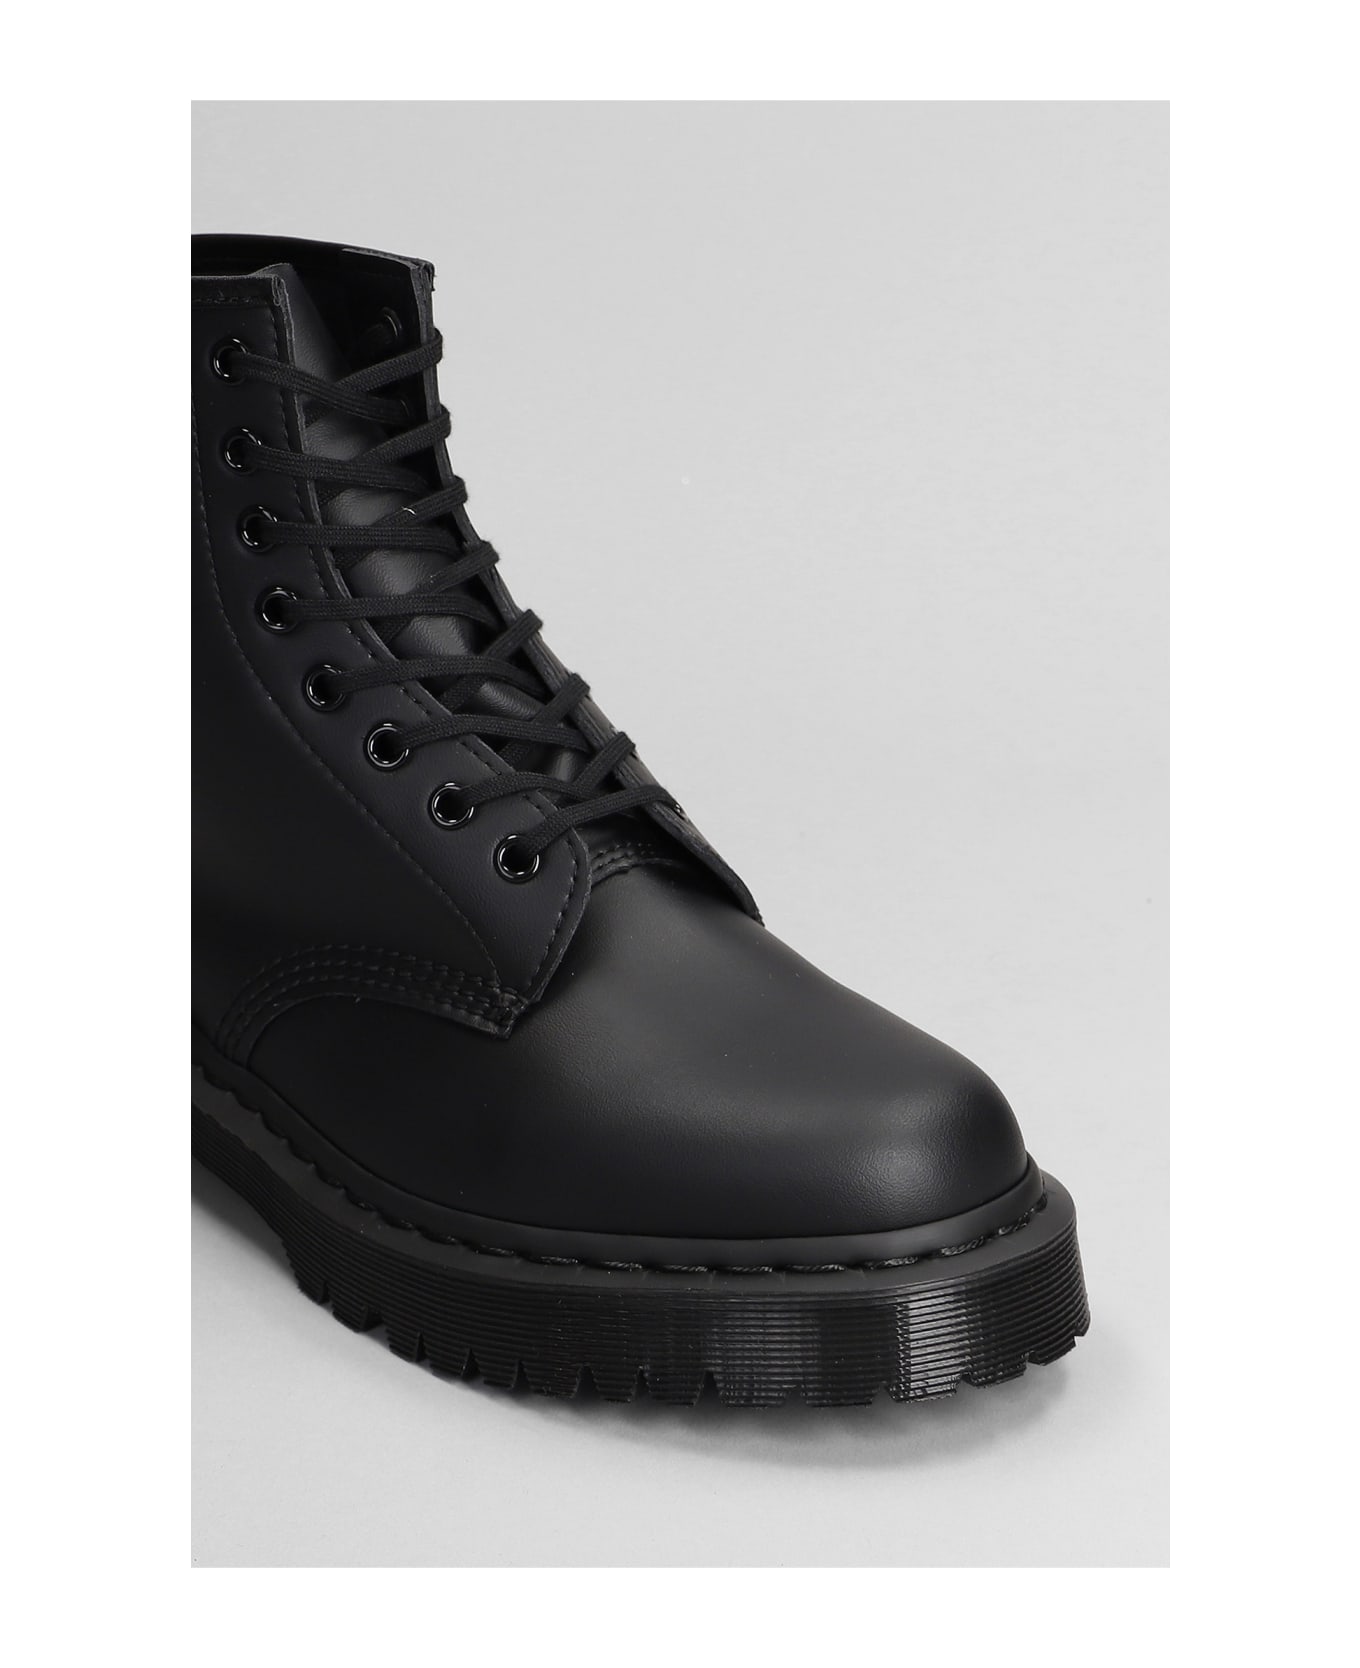 Dr. Martens 1460 Mono Combat Boots In Black Leather - black ブーツ